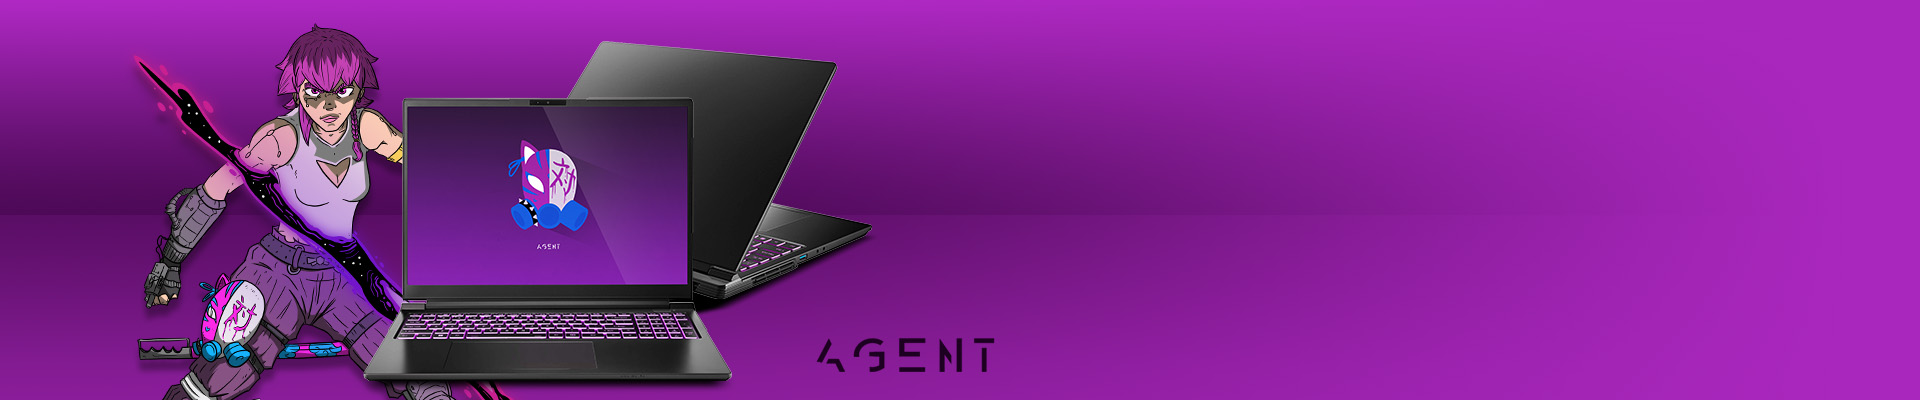 ONE GAMING Agent Laptop